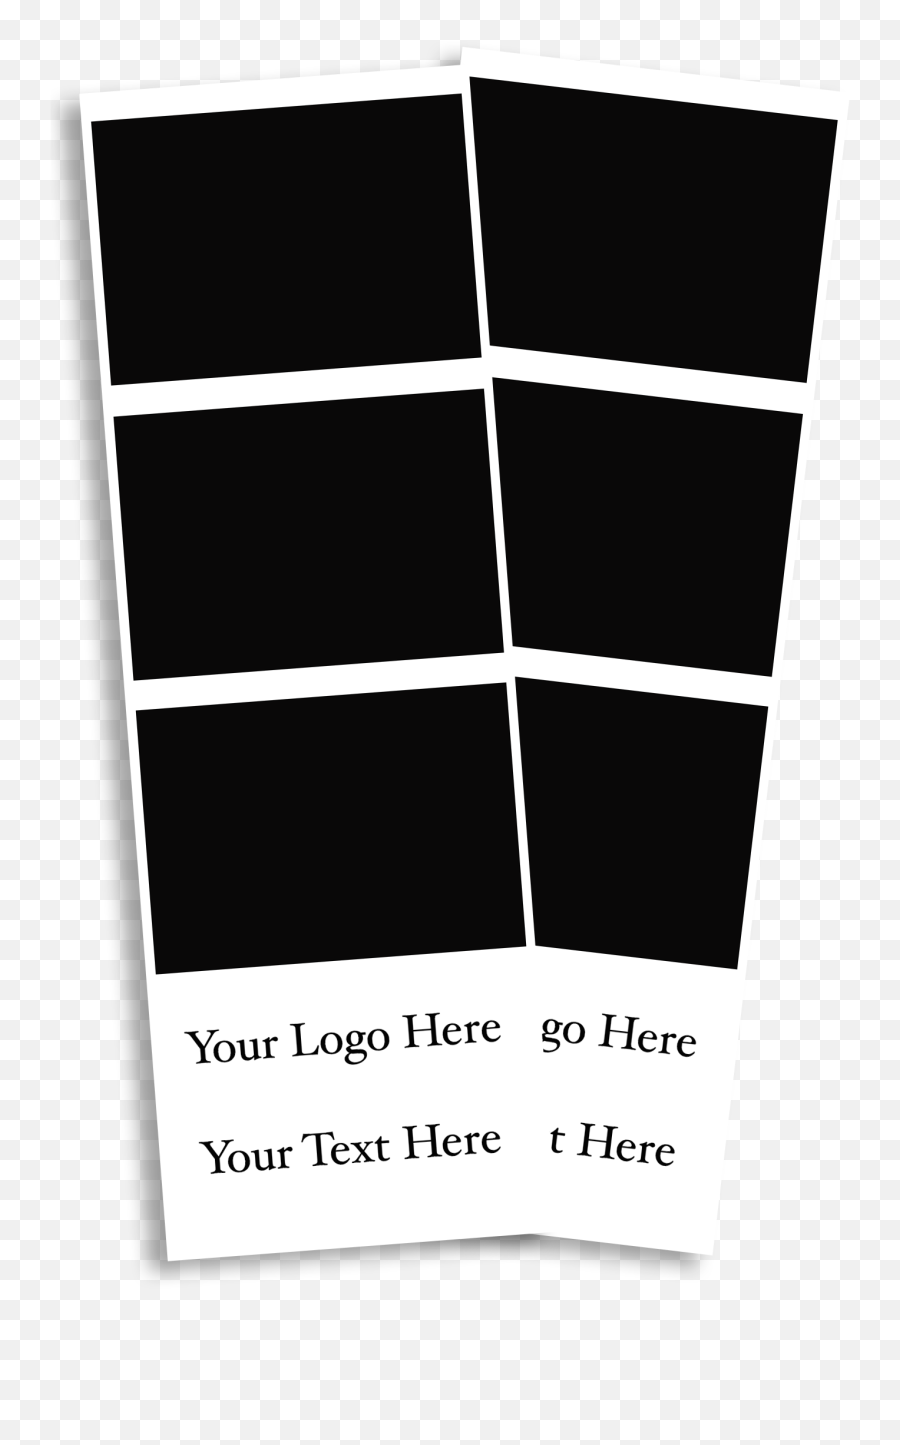 2x6 Template Designs - Current Photofox Photo Booth Emoji,Your Logo Here